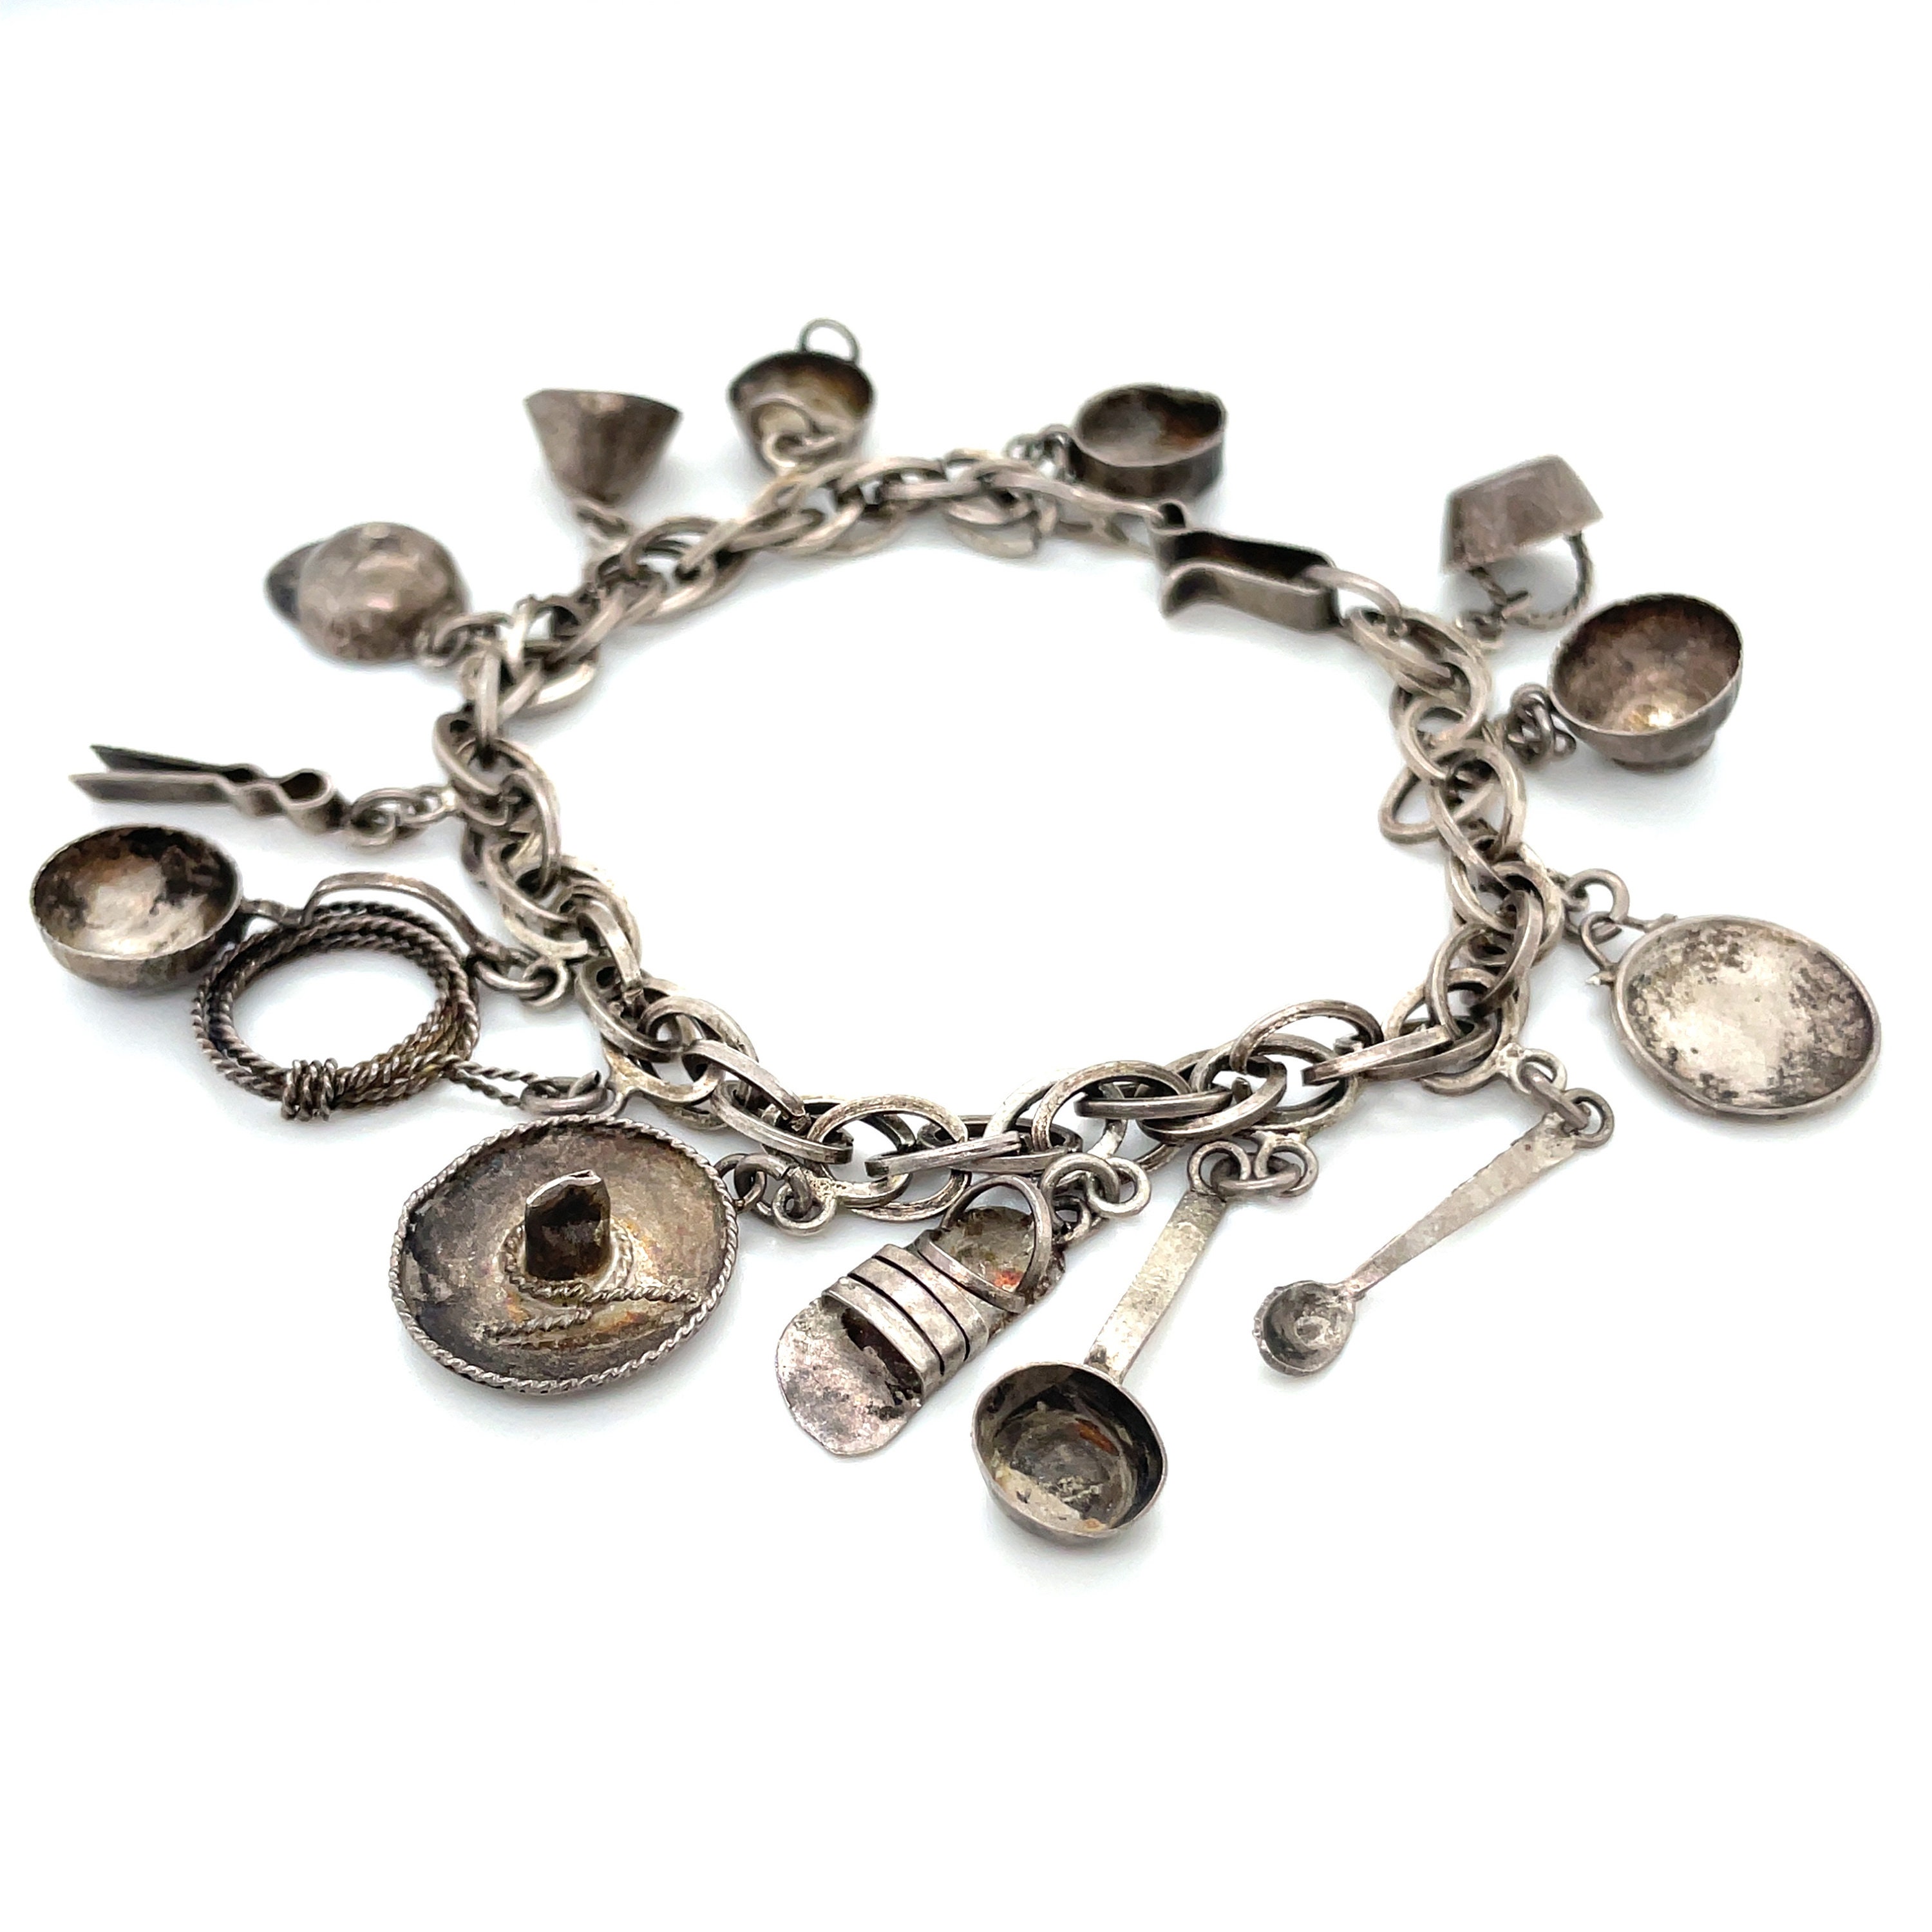 14 Charm Loaded Silver Antique Mexican Charm Bracelet, Mexico